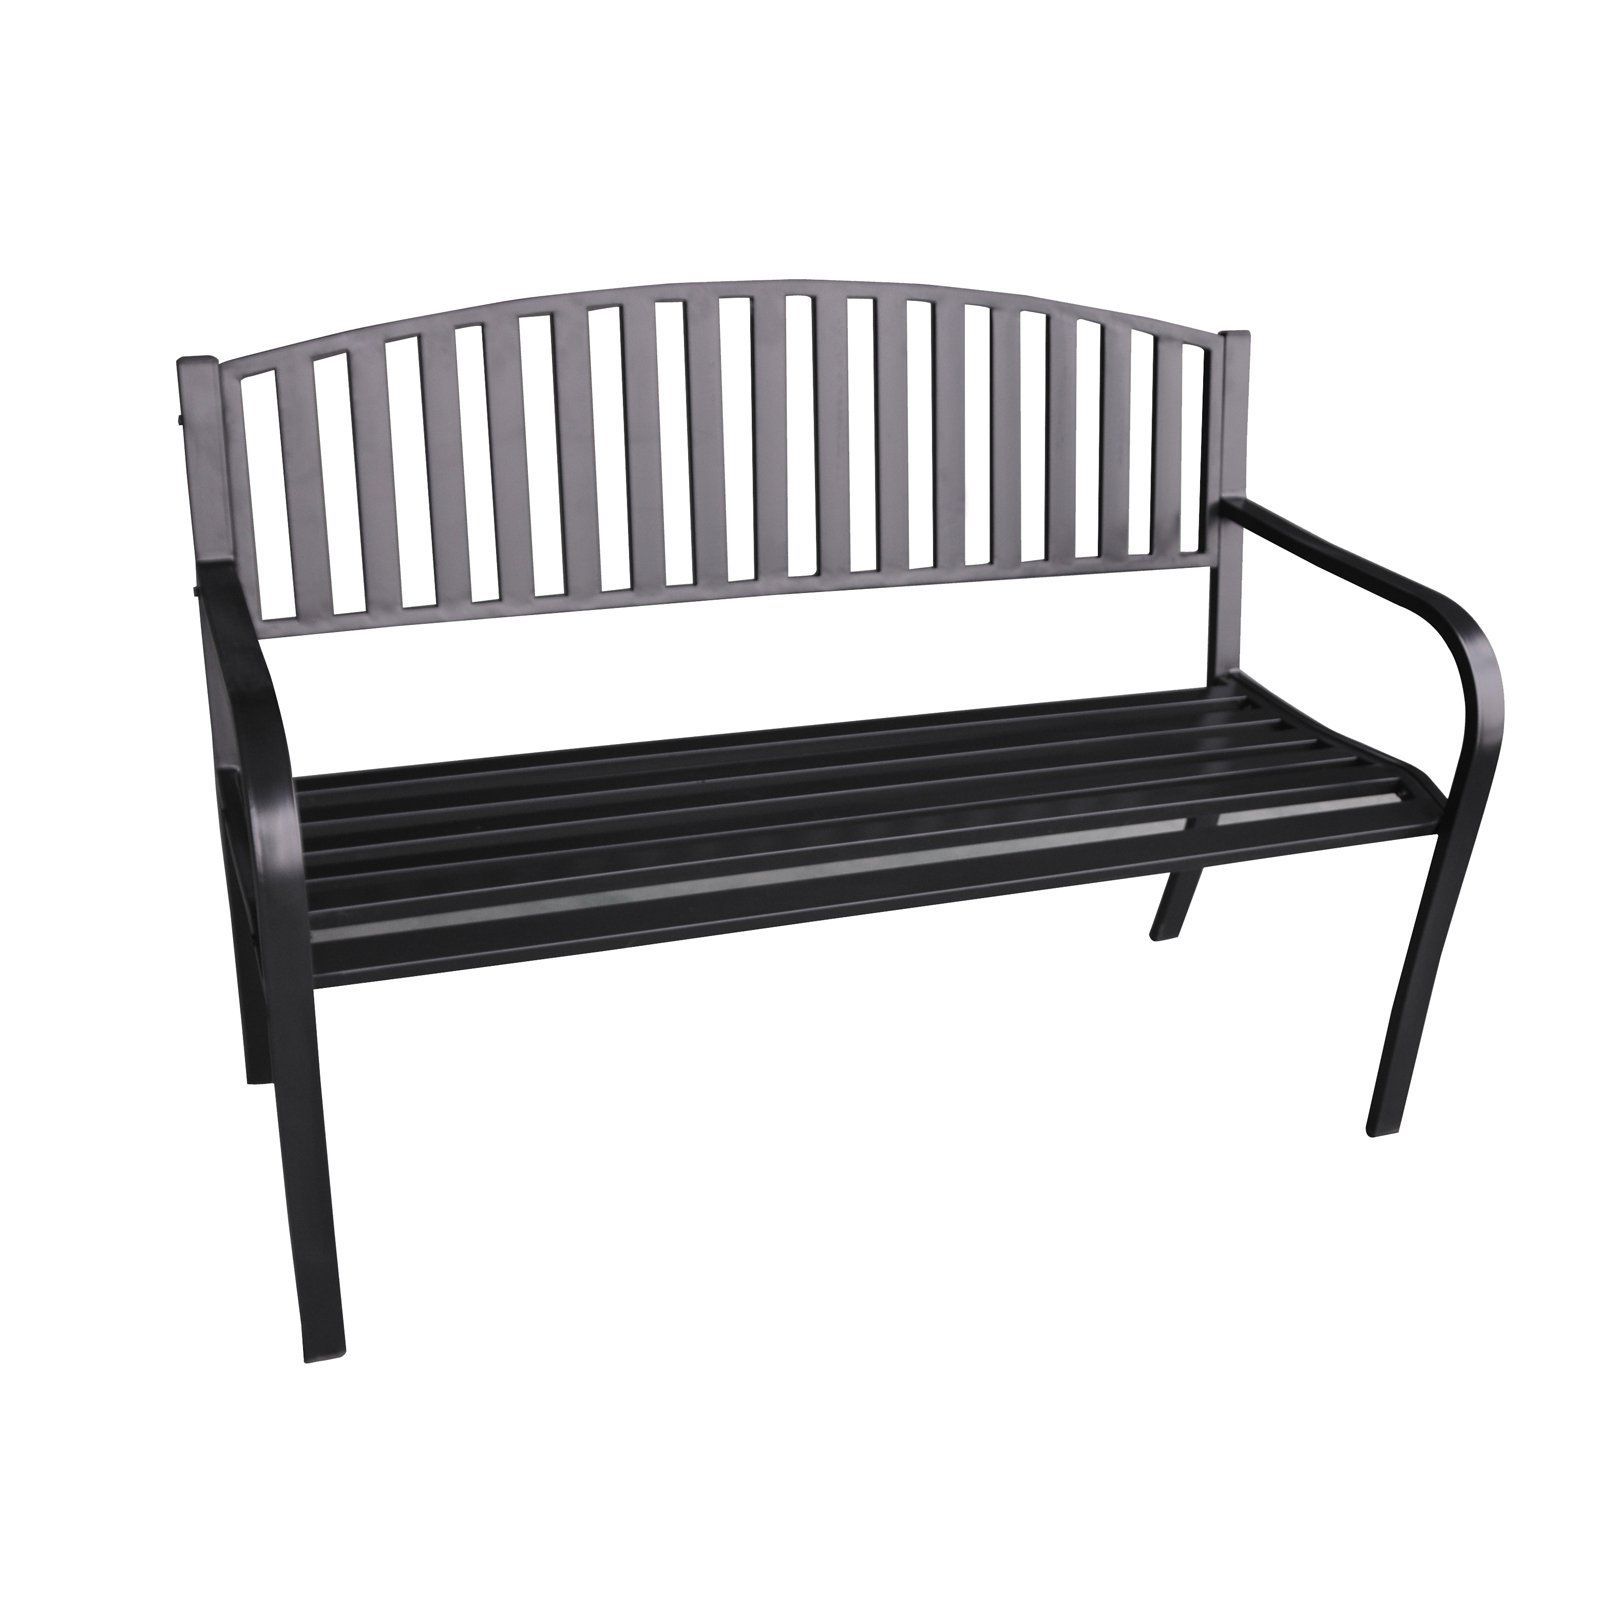 Pettit Steel Garden Benches With Recent Abble Steel Slat Back Garden Bench – Black In  (View 7 of 30)